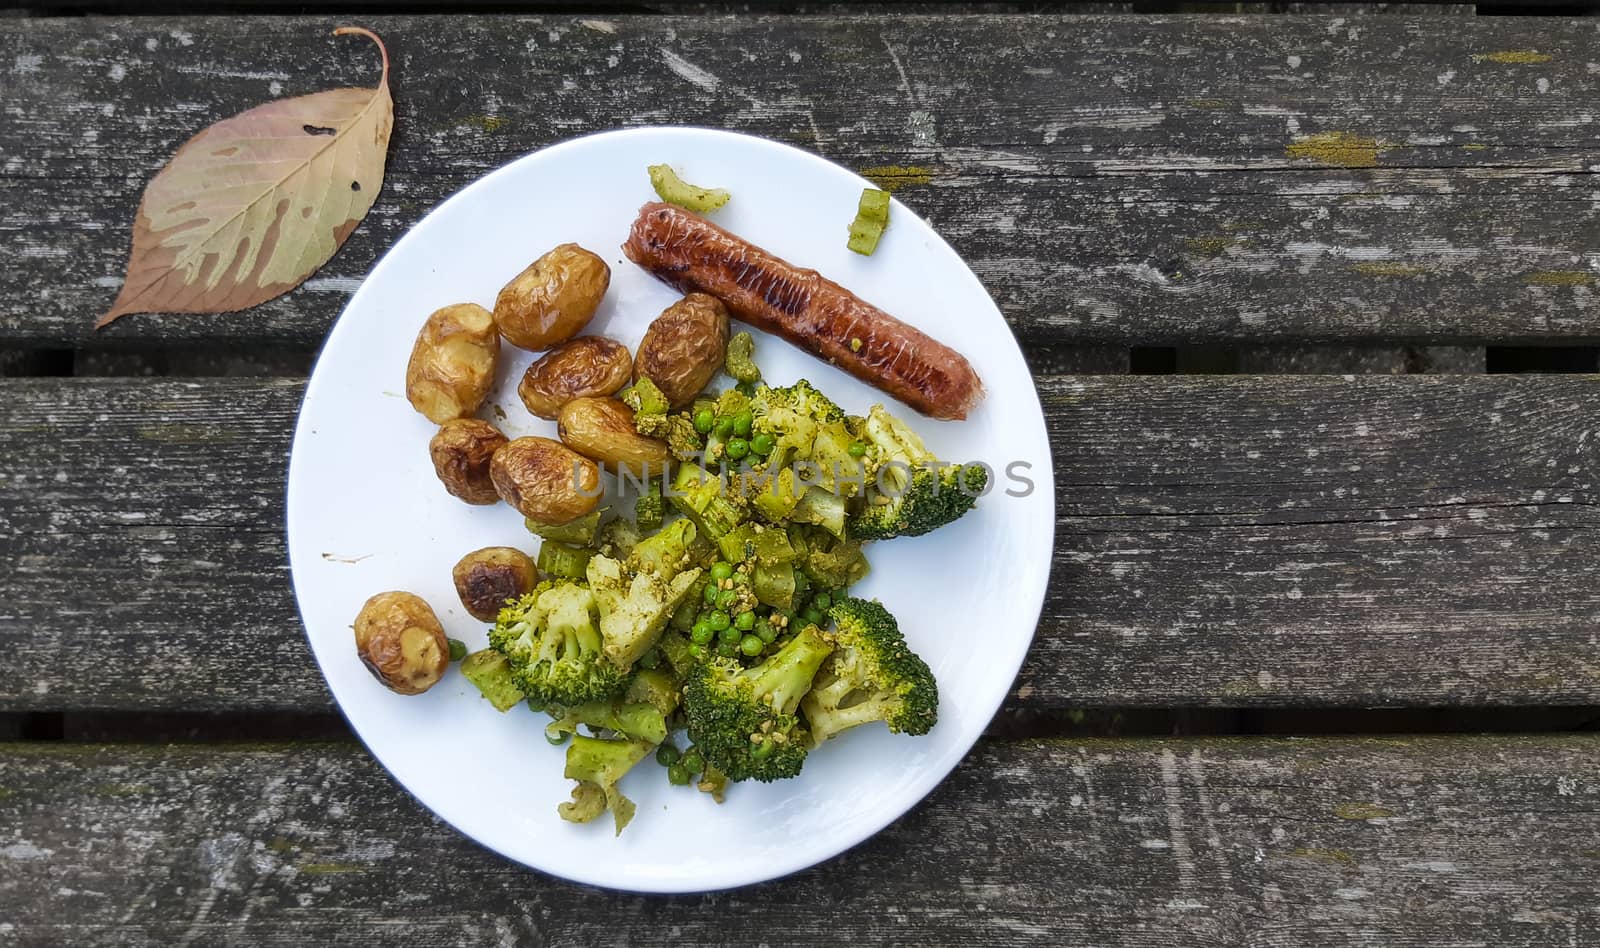 Vegan meal with oven baked potatos, plant based sausace, broccoli, peas and pesto on a white plate. Veganism and delicious food on weathered wooden table..